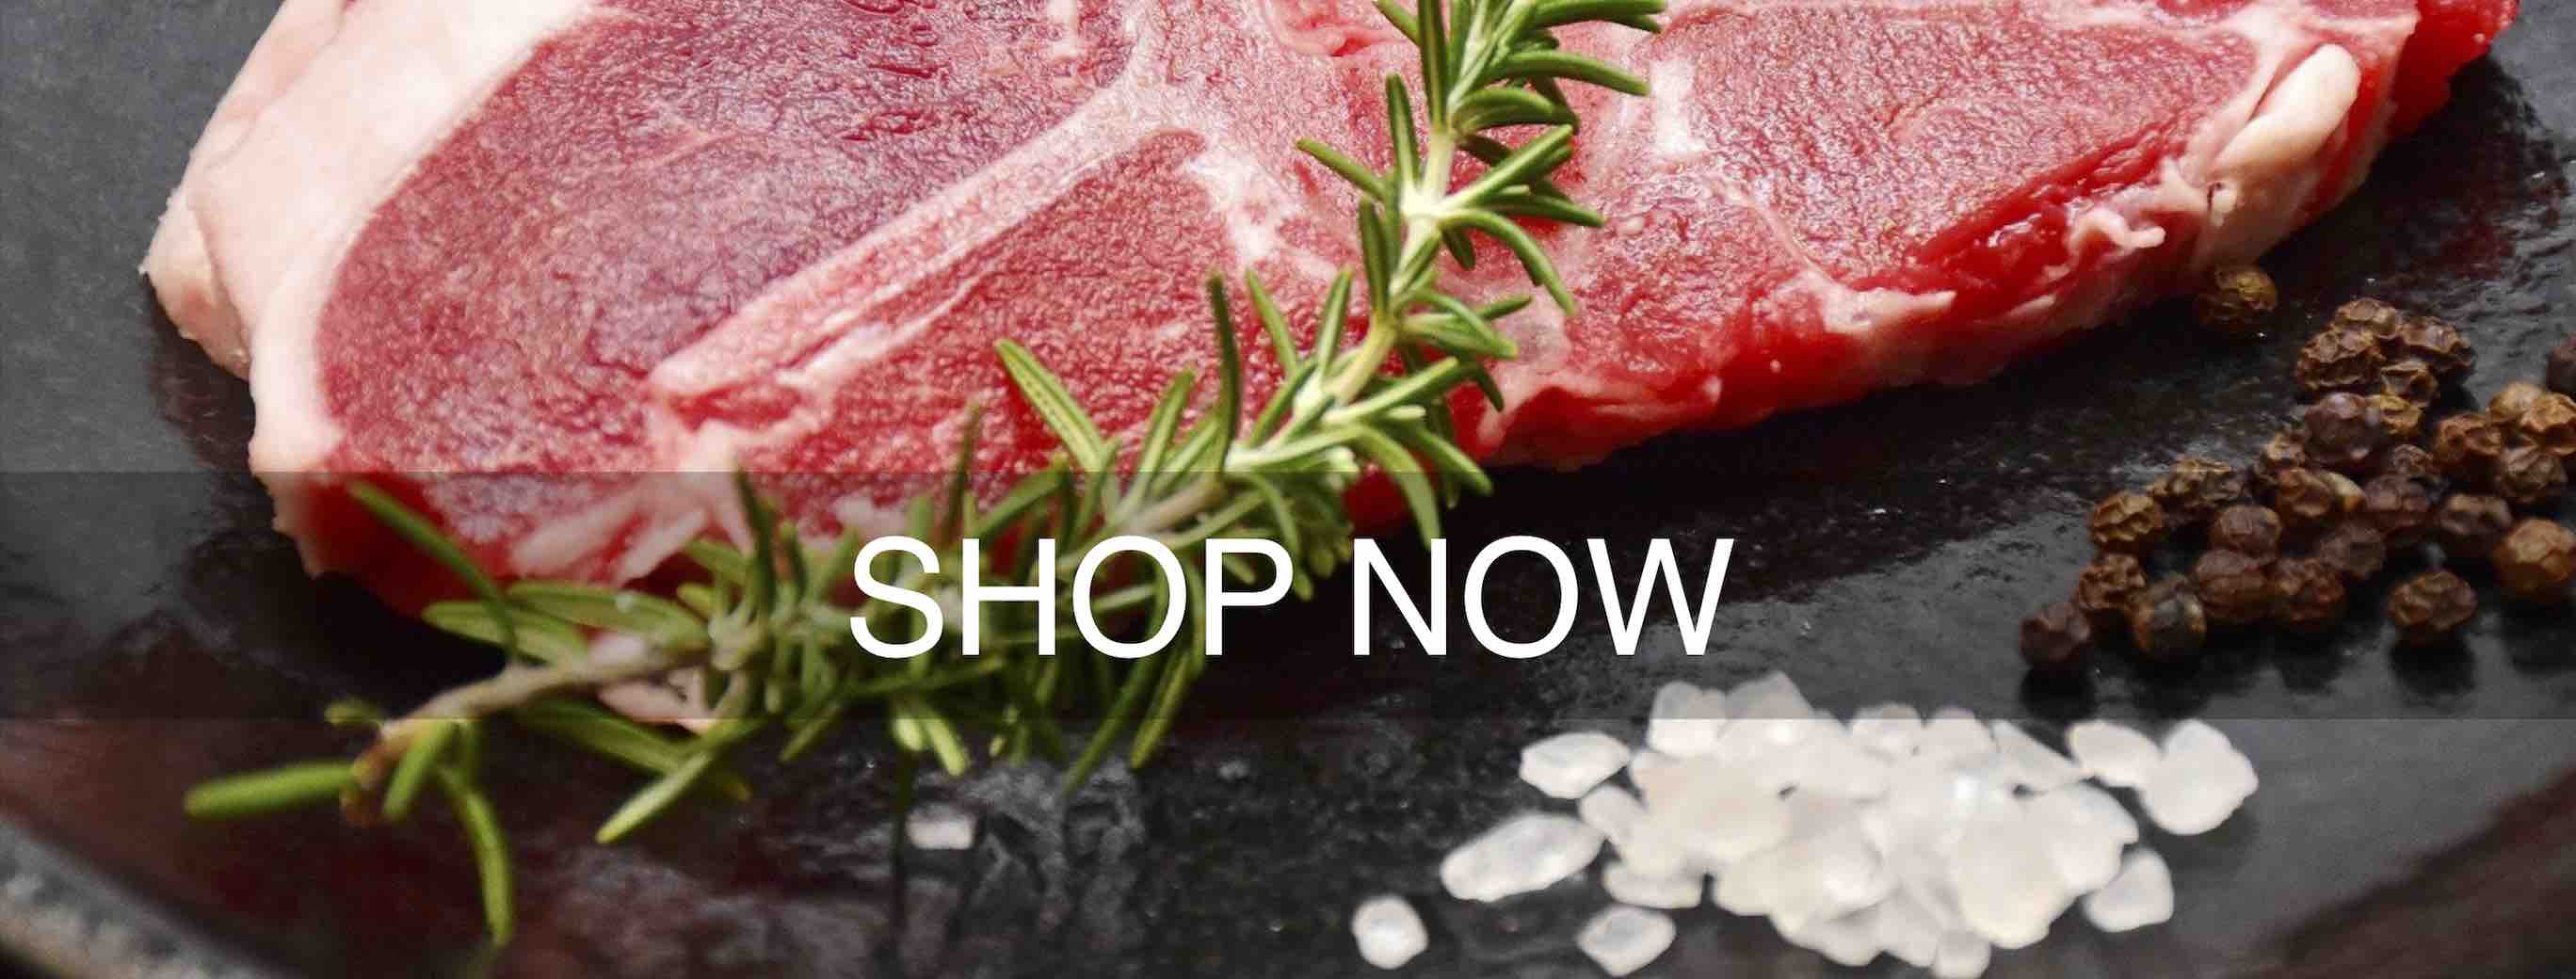 Shop Now at EastEnd Meats and Sausage. In-Store/Curbside Pick-Up